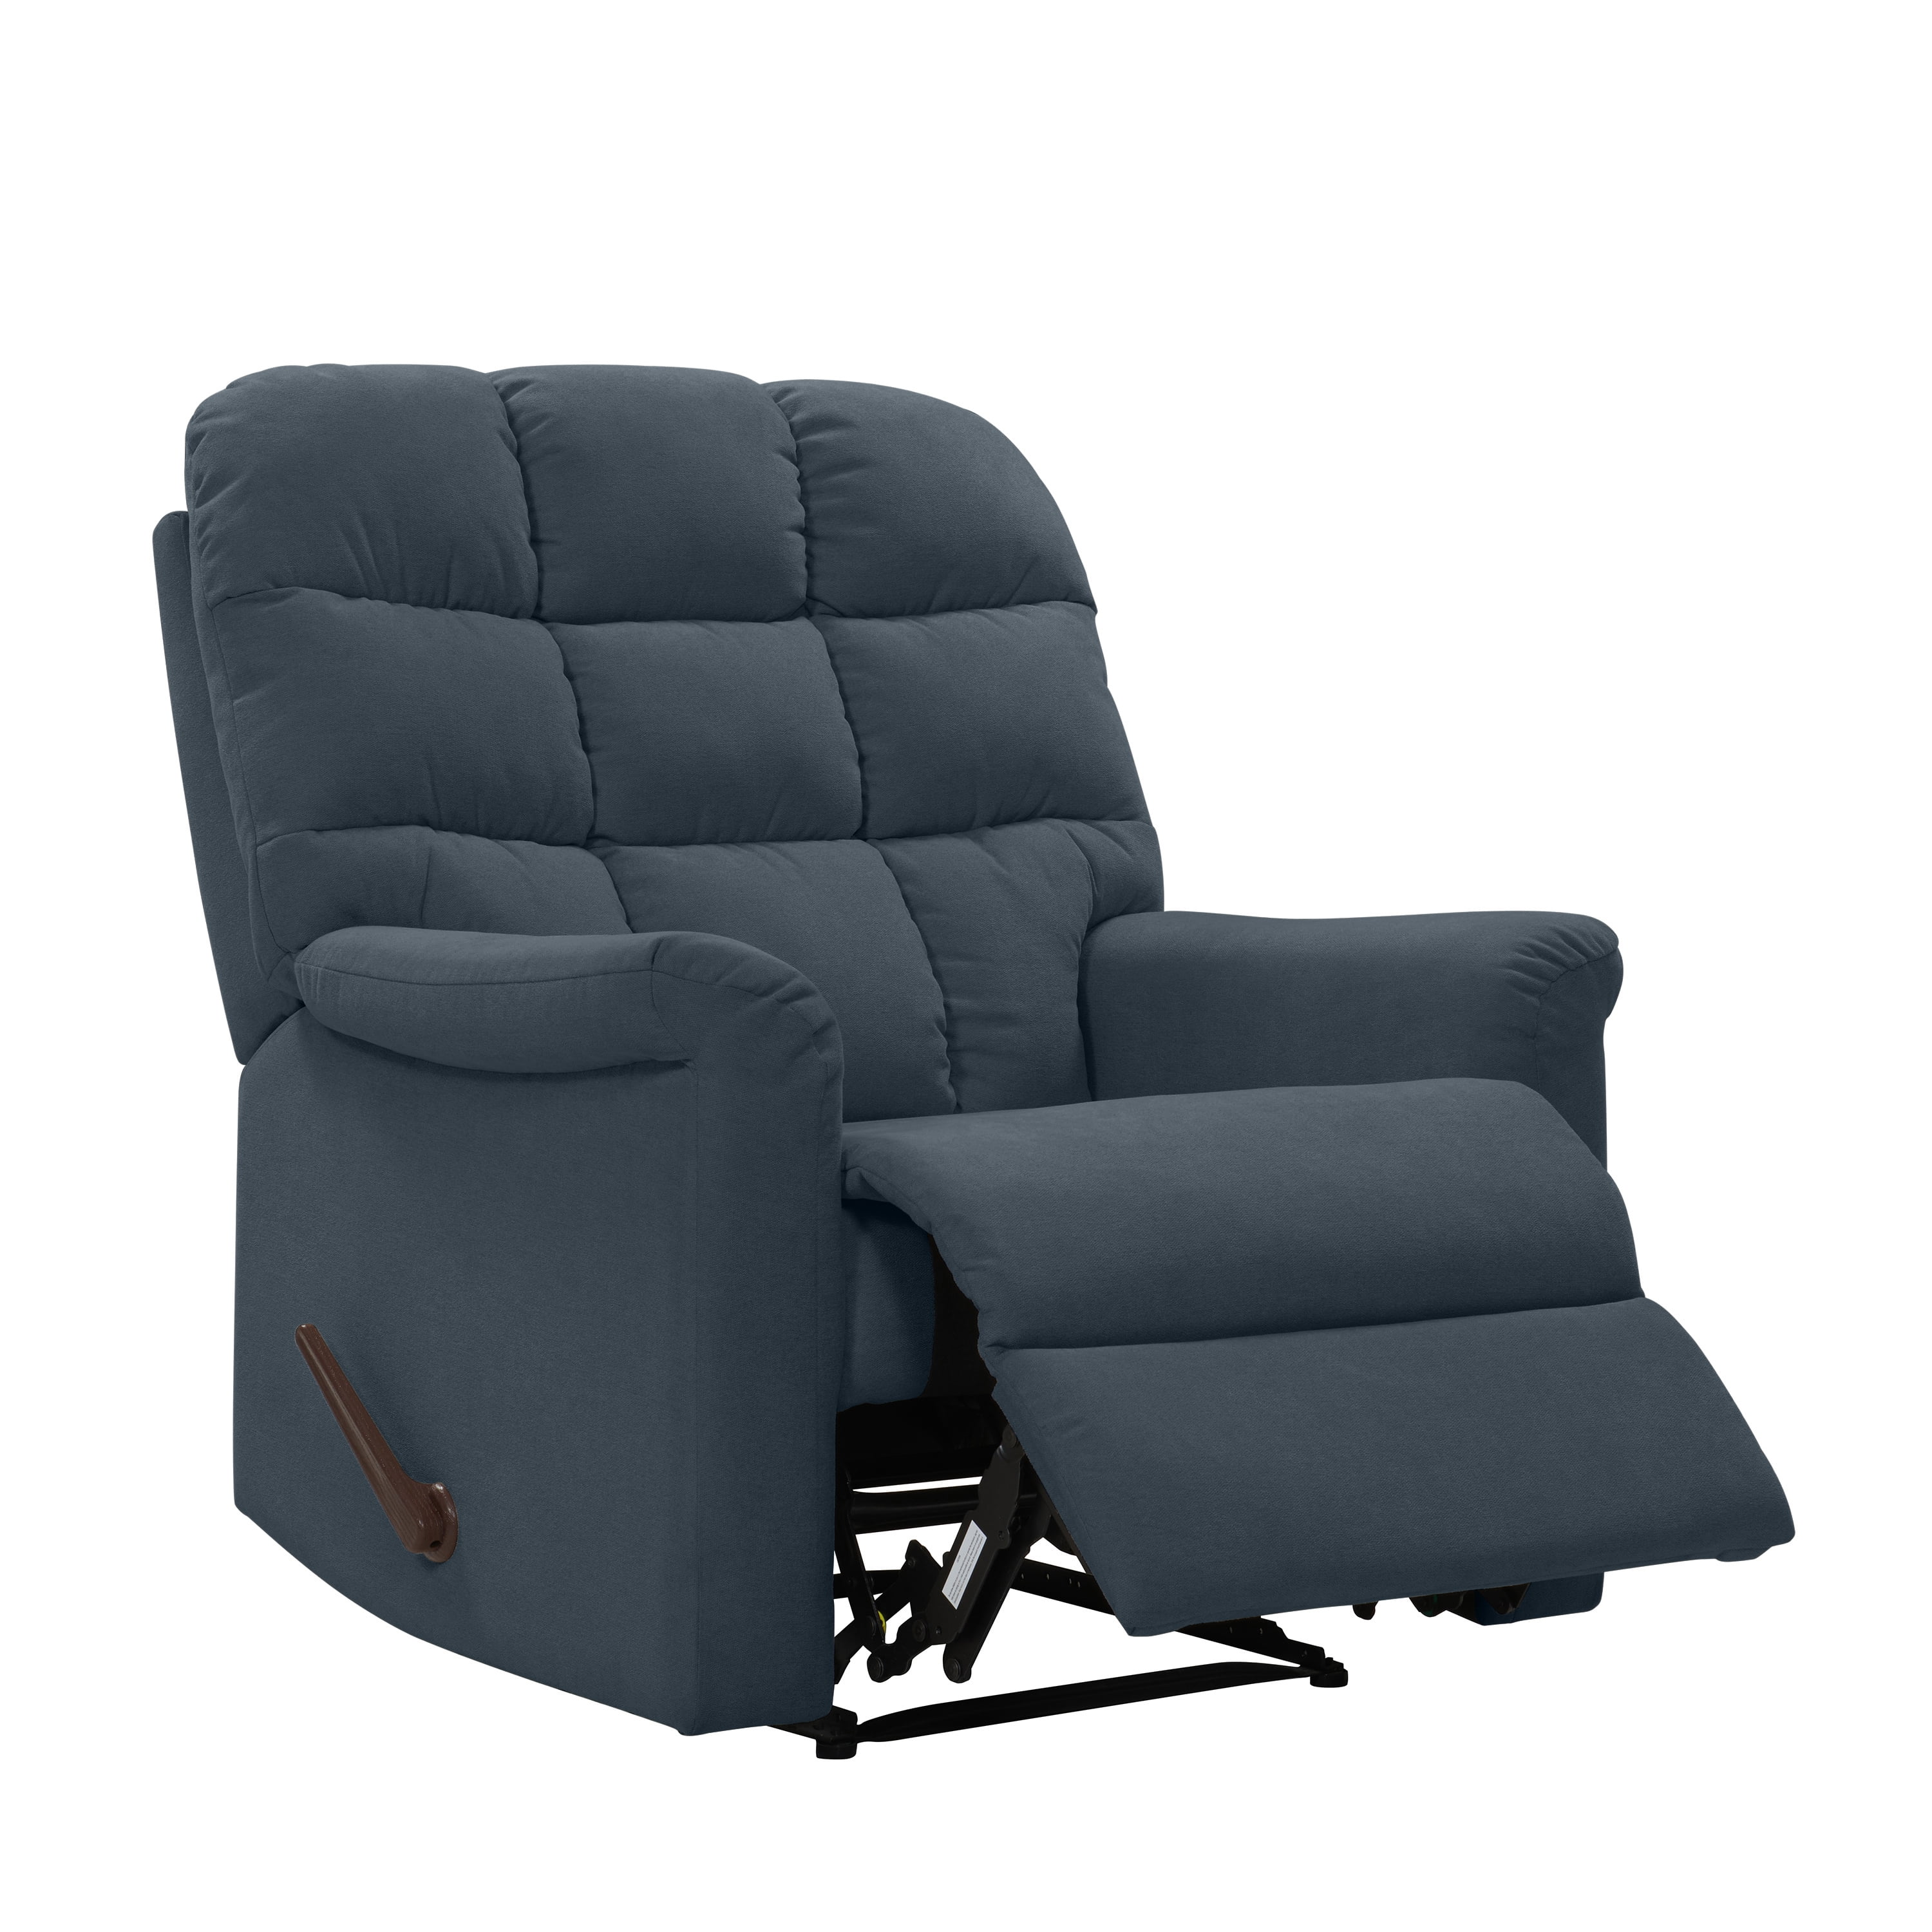 Homesvale Tufted Back Extra Large Wall Hugger Reclining Chair in Plush